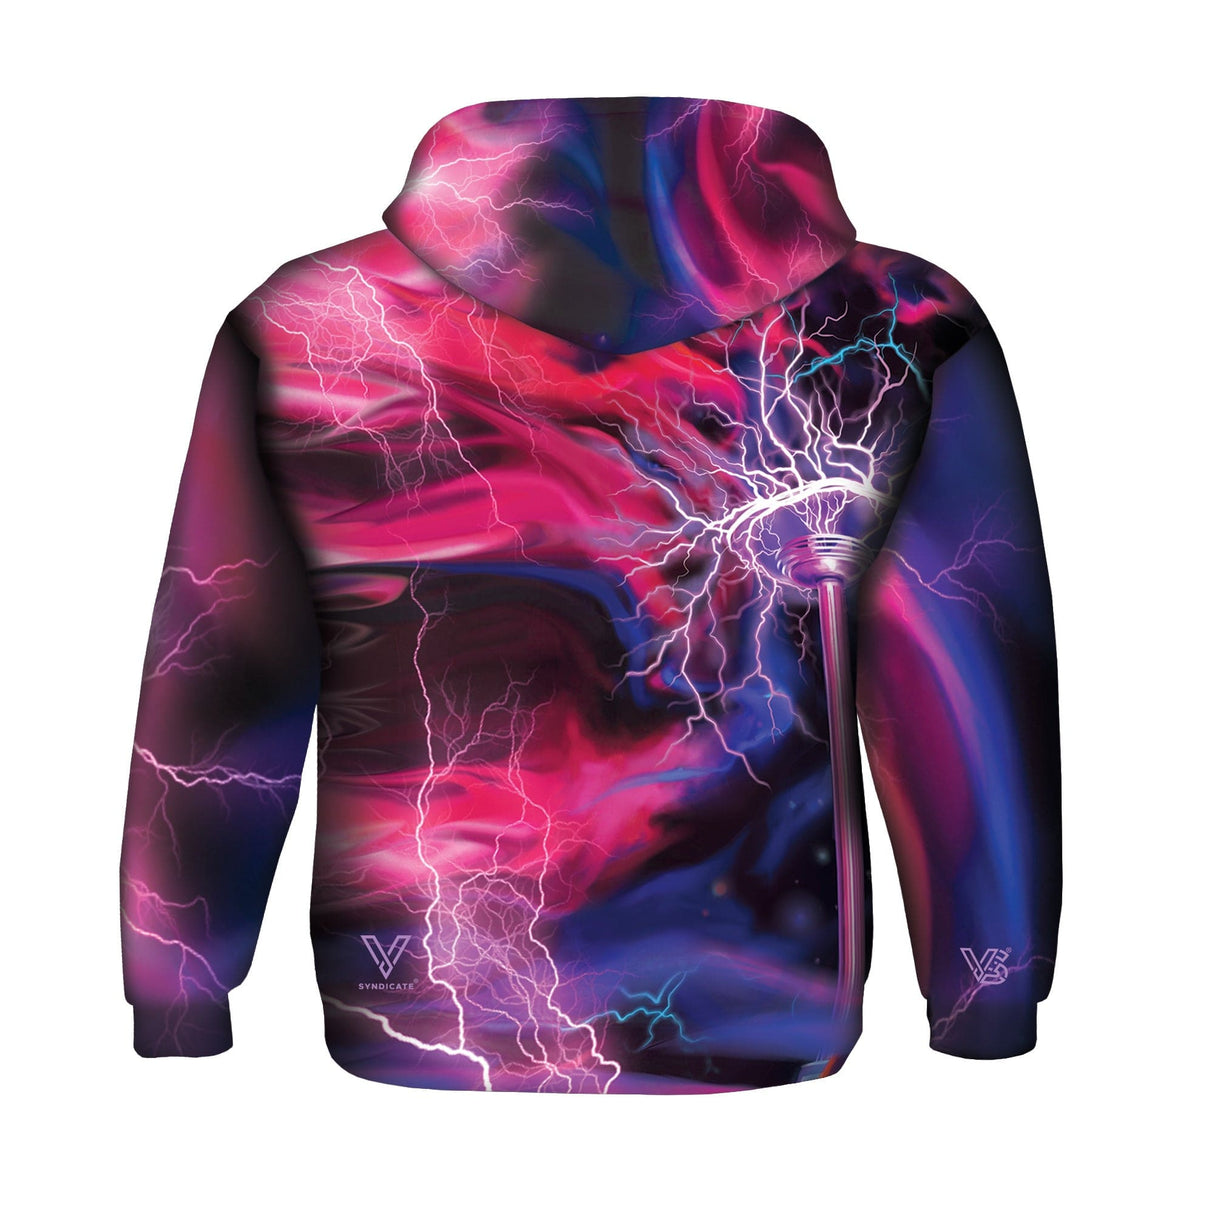 V Syndicate High Voltage Hoodie with 360° Electric Print, Size 2XL, Rear View on White Background